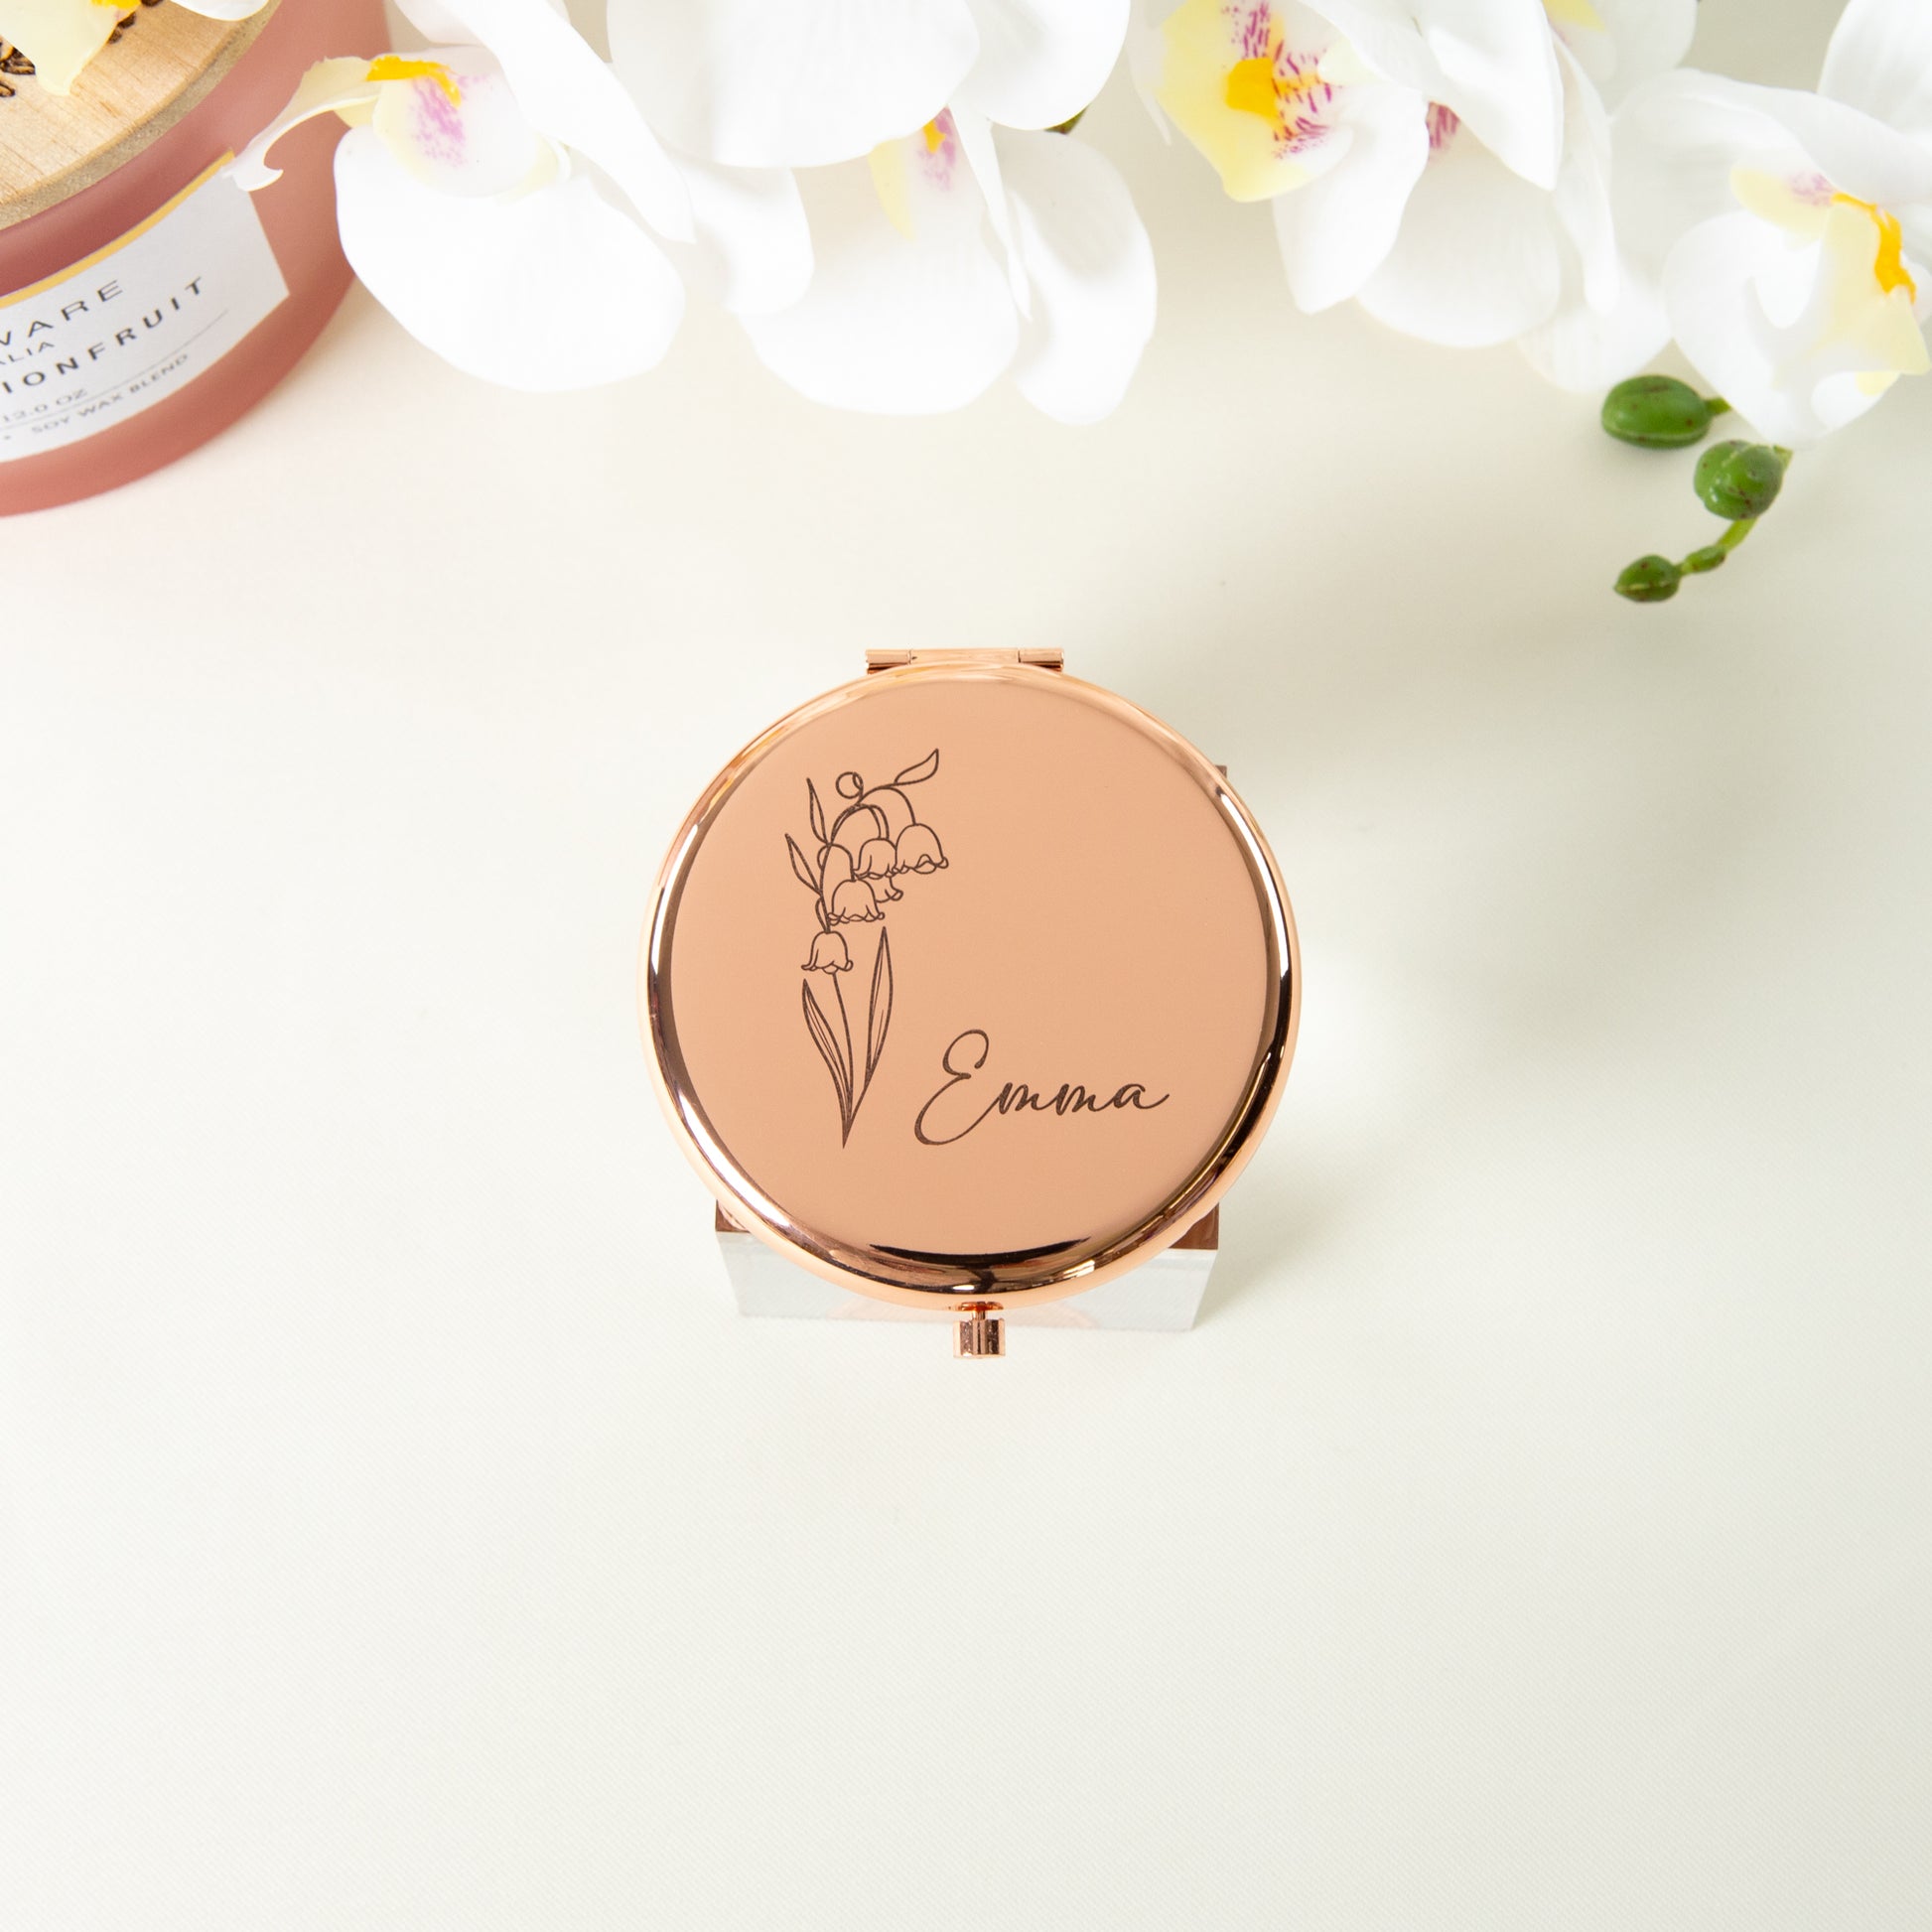 Rose gold personalised compact mirror with Emma engraved on it